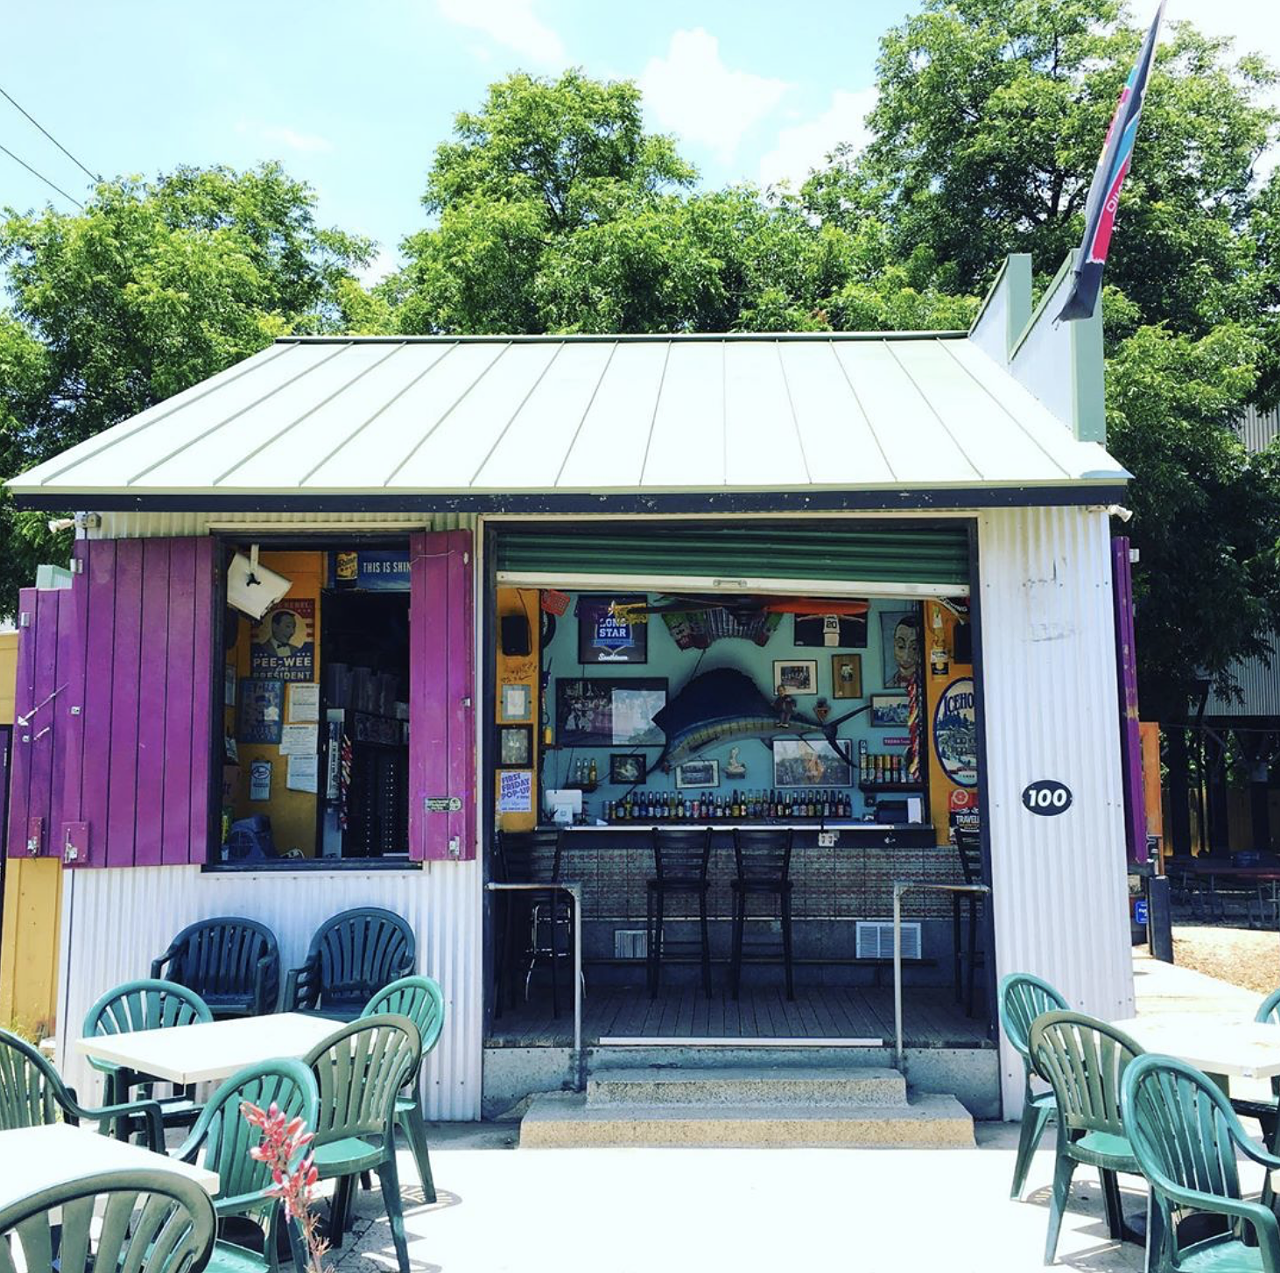 La Tuna Icehouse
100 Probandt St., (210) 212-5727, latunasa.com
For over 27 years, La Tuna Icehouse has been serving cold beer and wine to guests on their front outdoor patio, which includes an array of pecan tree-shaded picnic tables. 
Photo via Instagram /  
latunaicehouse